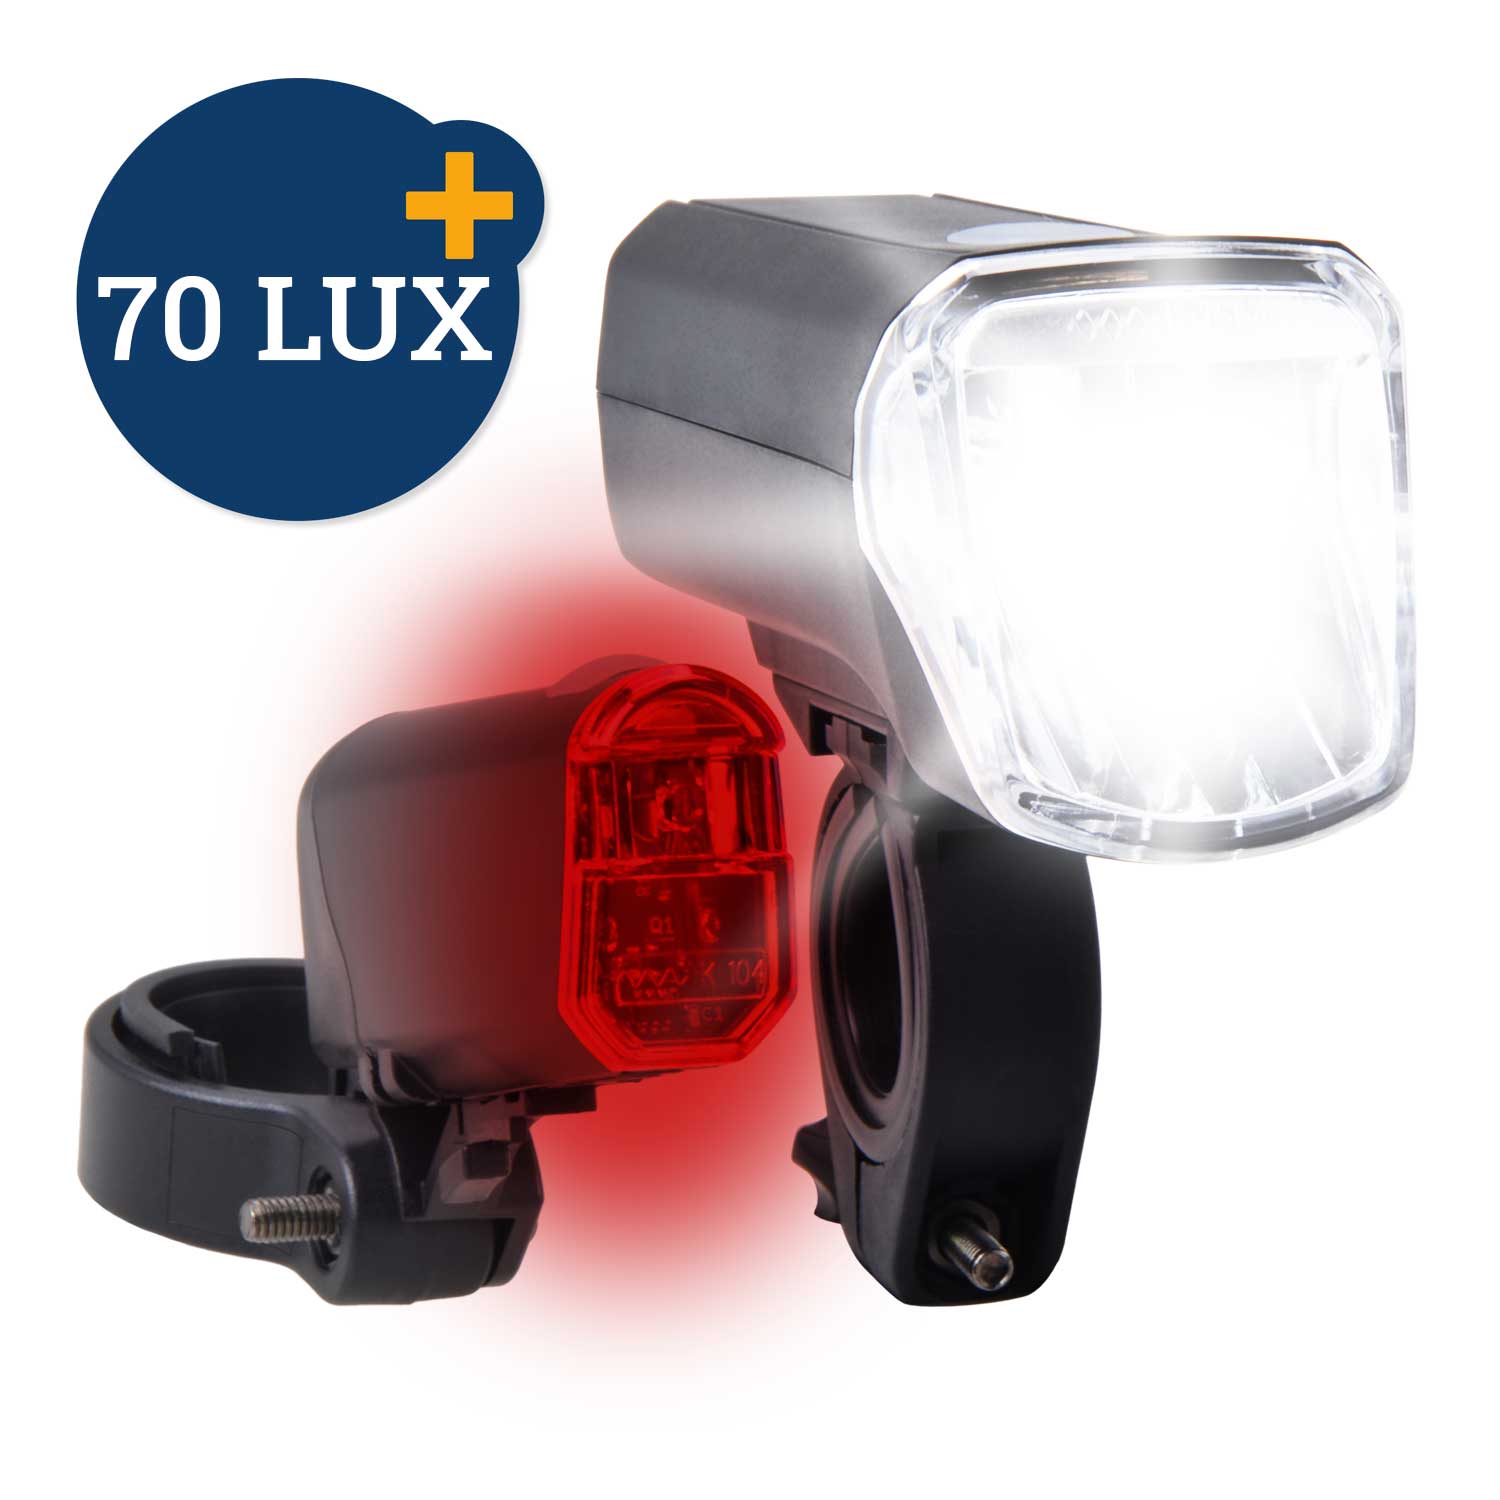 LED-Beleuchtungs-Set 70 LUX